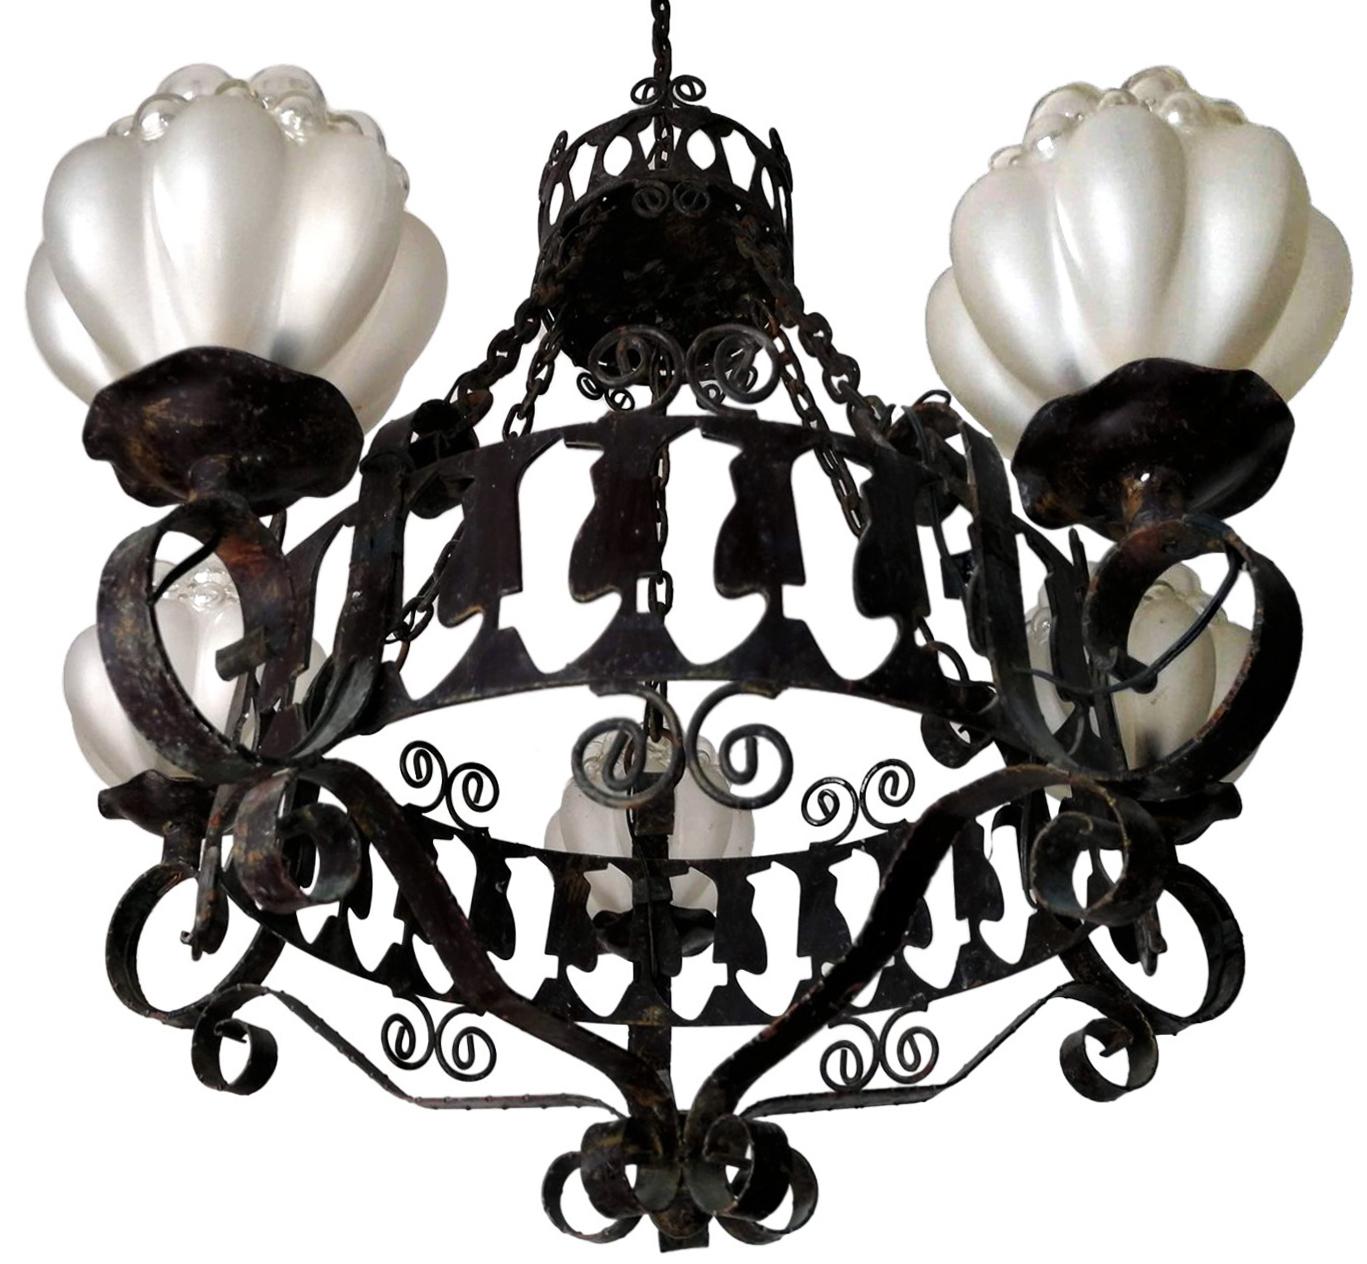 Black Italian fire forged iron chandelier with five hanging light glass globes. Unusual frosted and clear glass globes.
Measures:
Diameter 29.5 in / 75 cm
Height 39.5 in (23.7 in + 15.7 in /chain) / 100 cm (60 cm + 40 cm /chain)
Weight 13 lb. (6